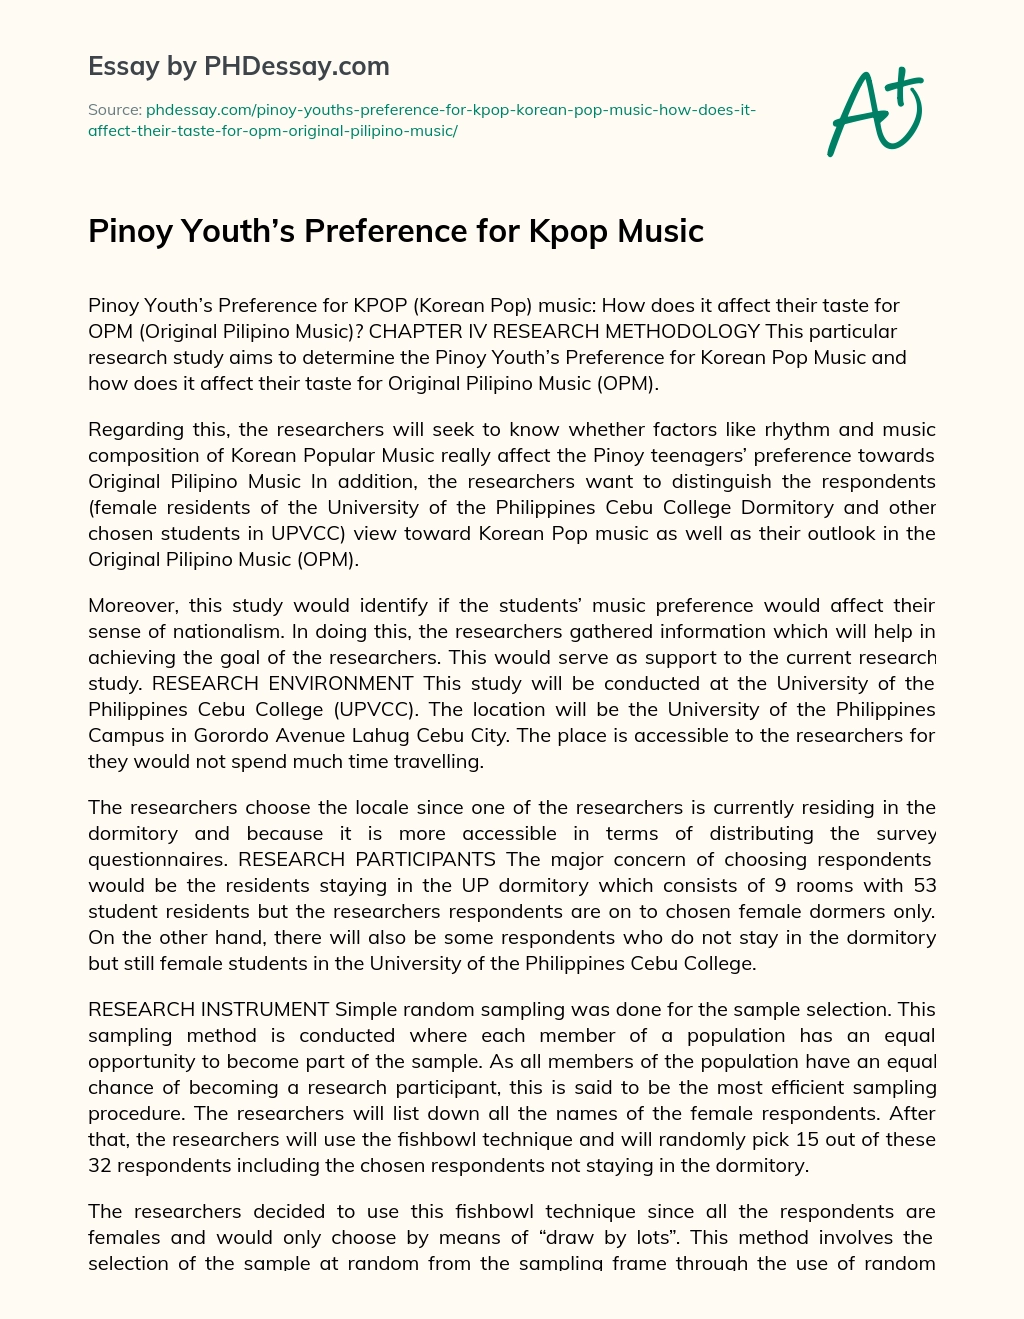 Pinoy Youth’s Preference for Kpop Music essay